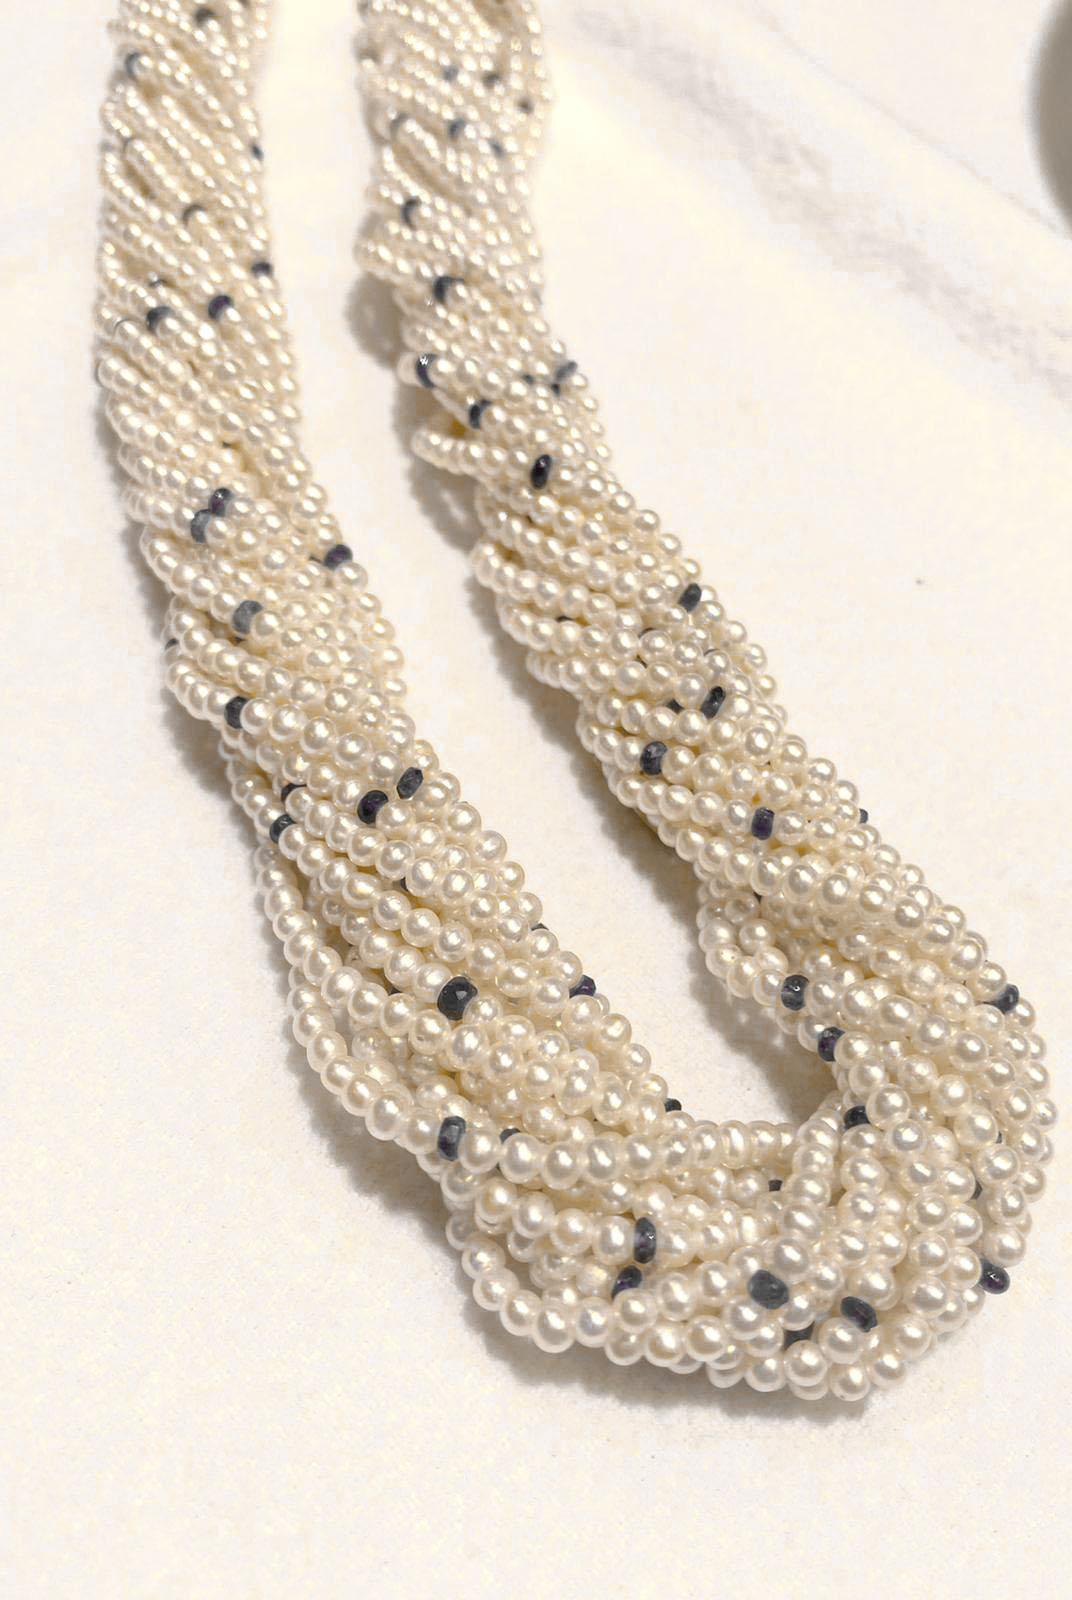 15 Strands of Biwa Pearls with Sapphire Beads and a 14k Yellow Gold Clasp In New Condition For Sale In LA, CA